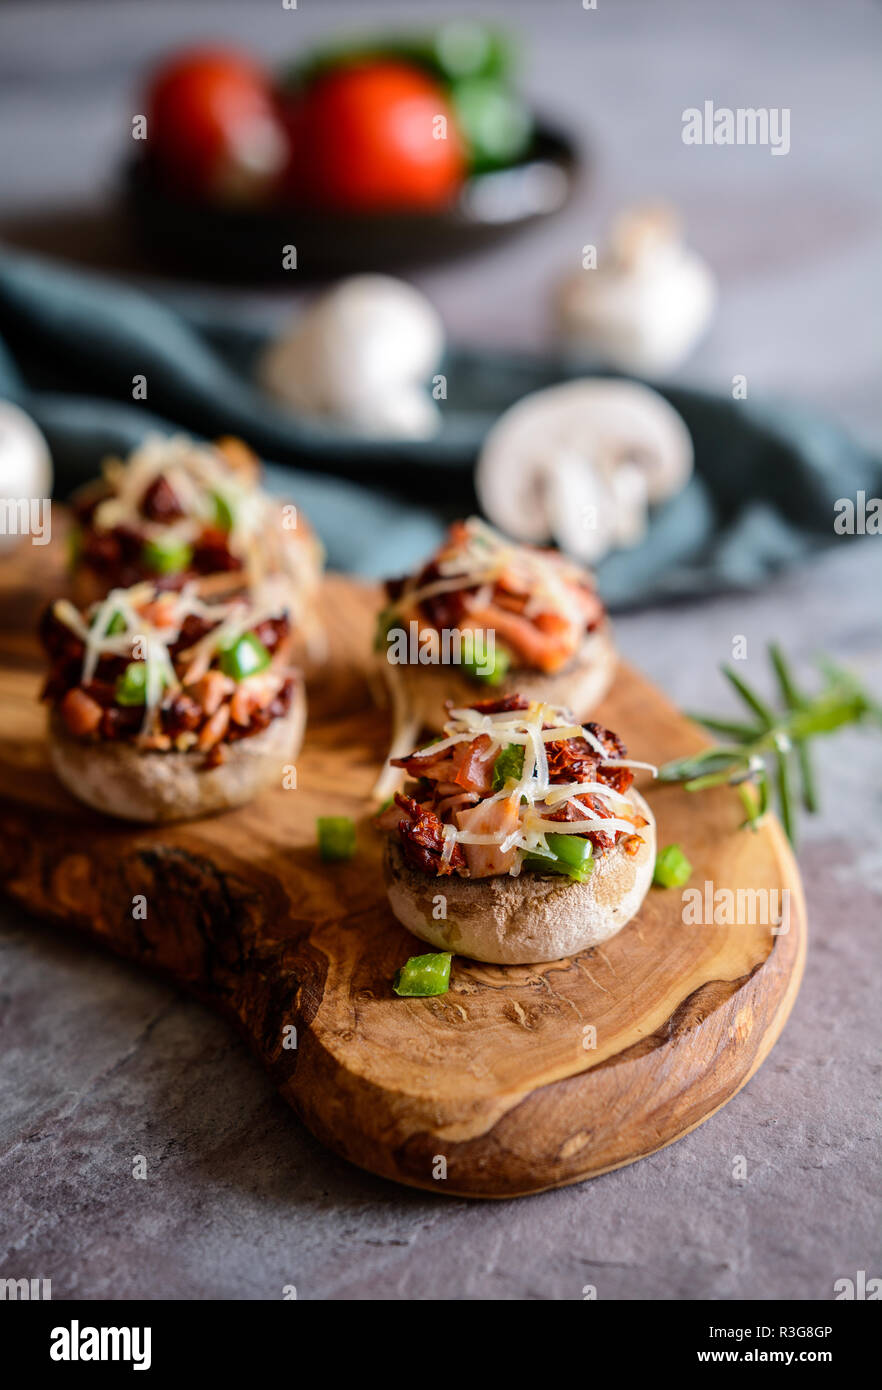 Roasted mushrooms stuffed with sliced ham, sun dried tomato and green bell pepper Stock Photo